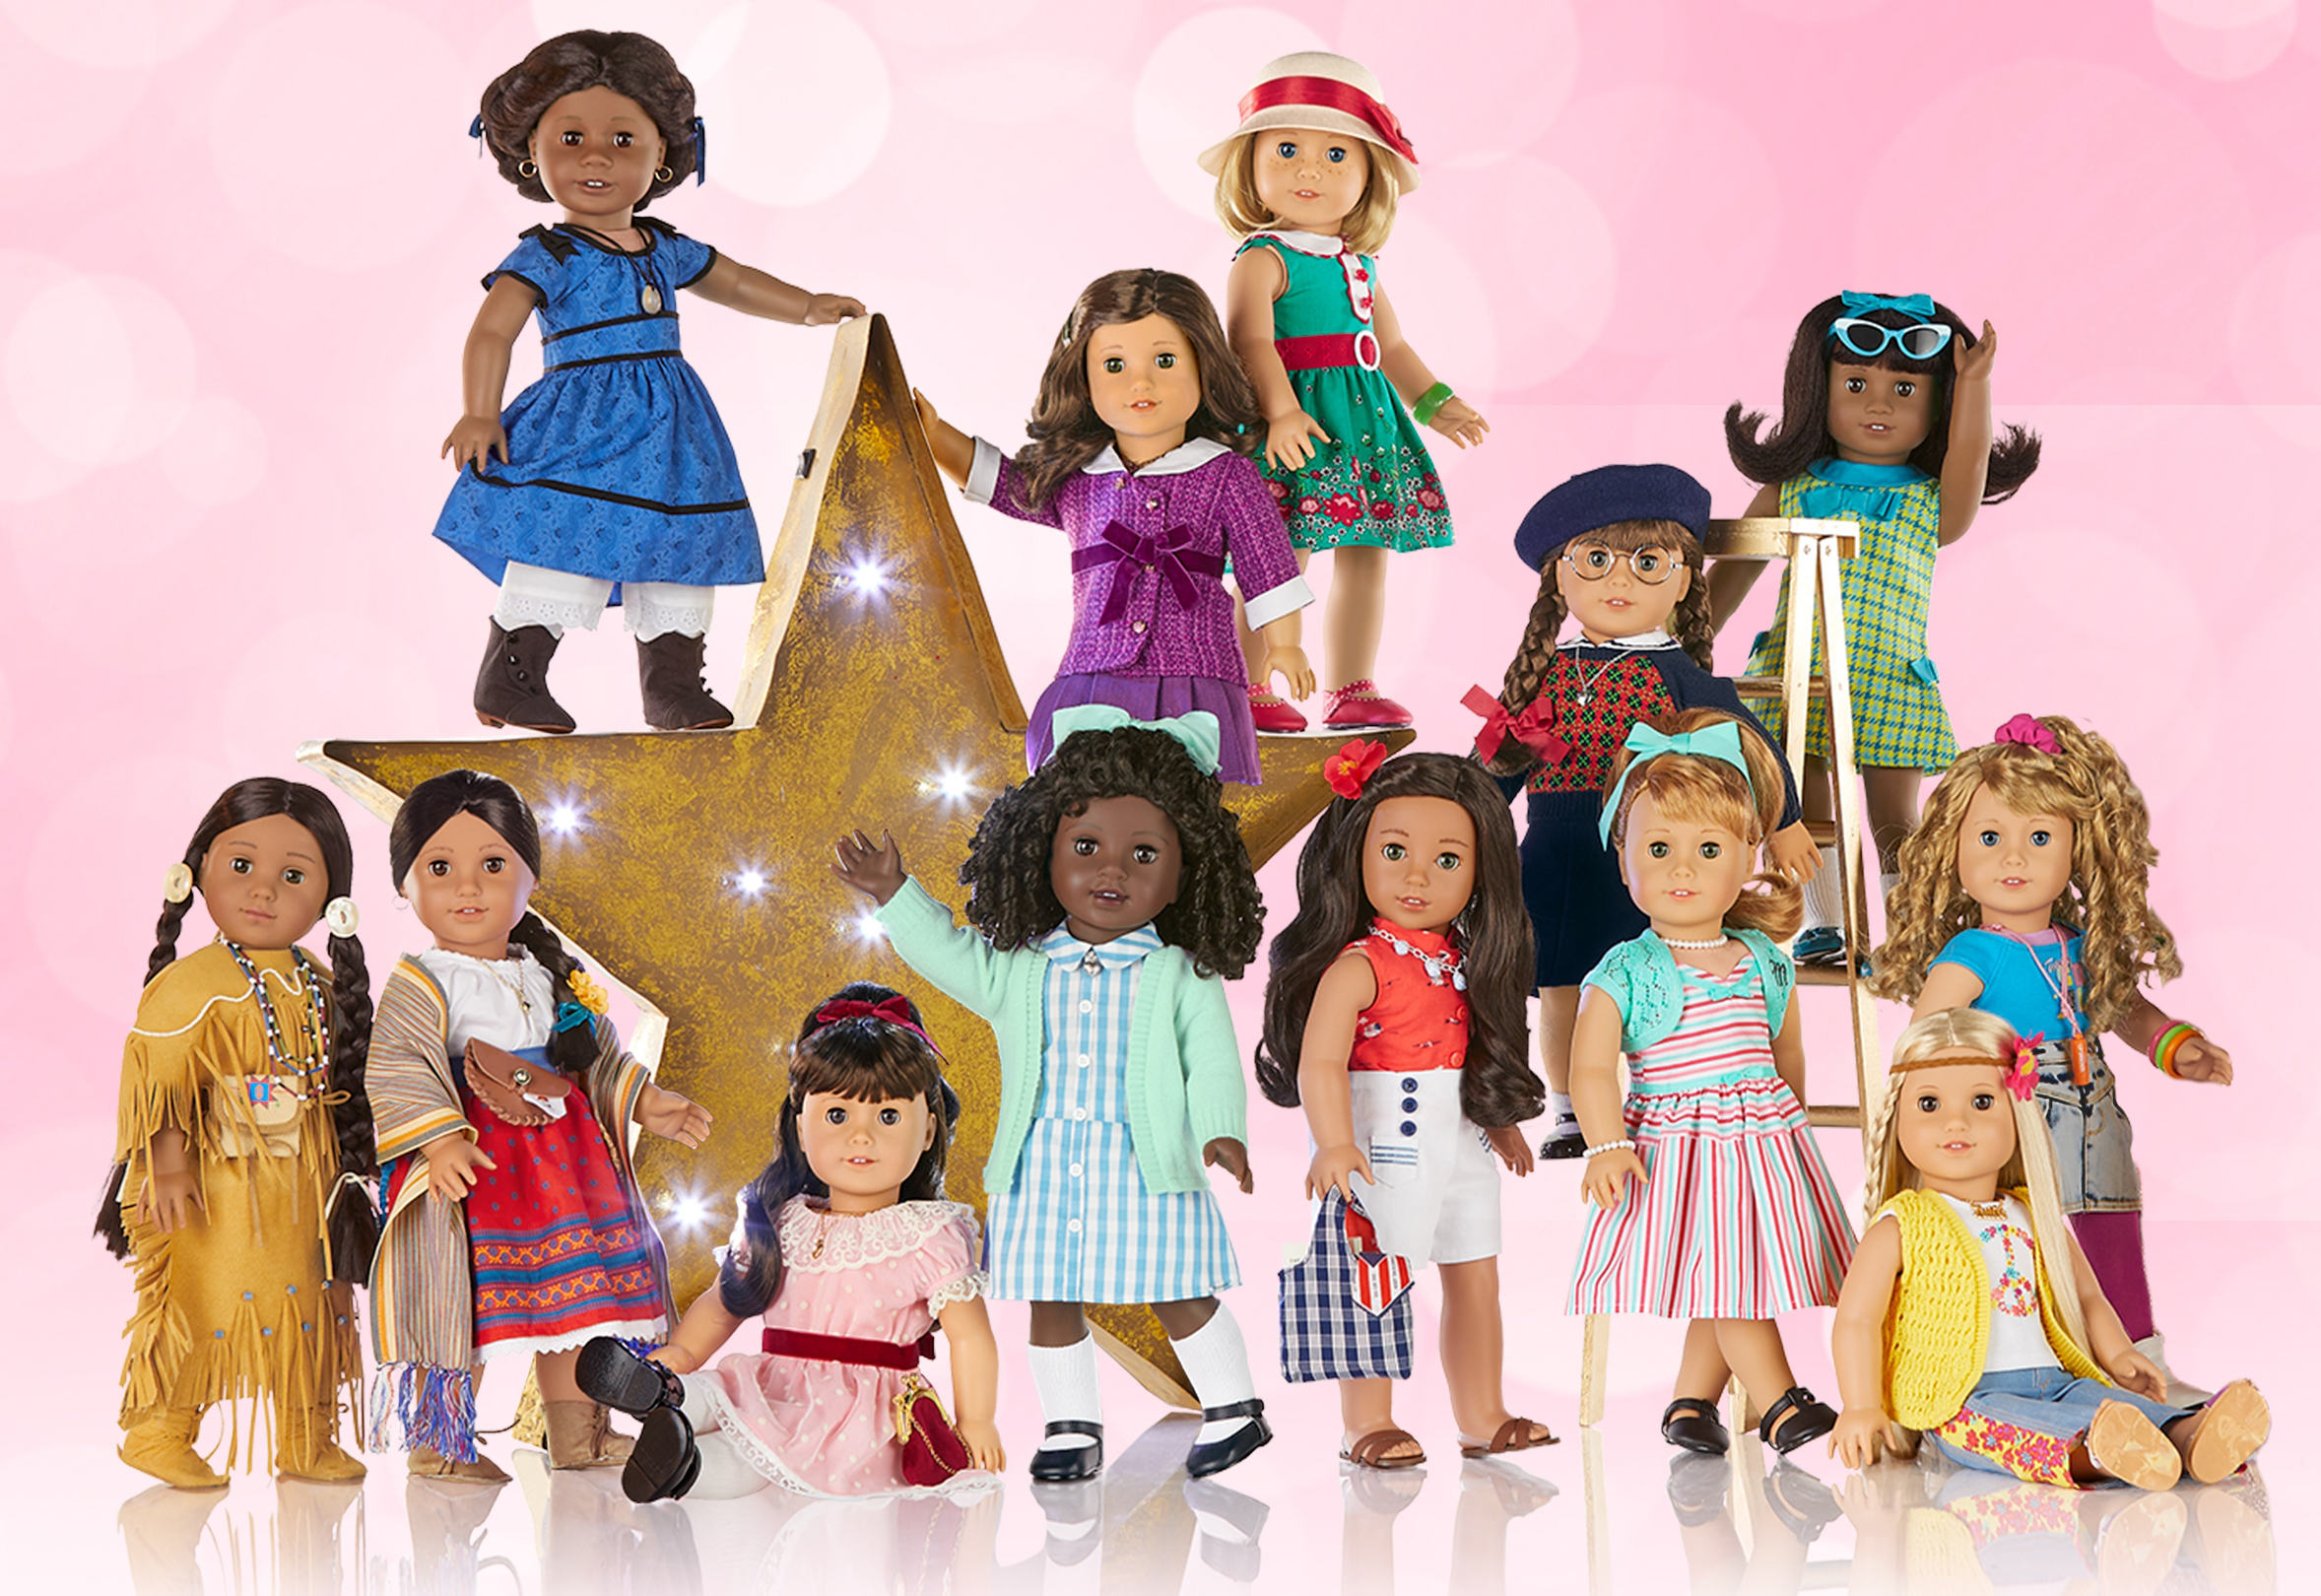 My son is getting an American Girl Doll for Christmas